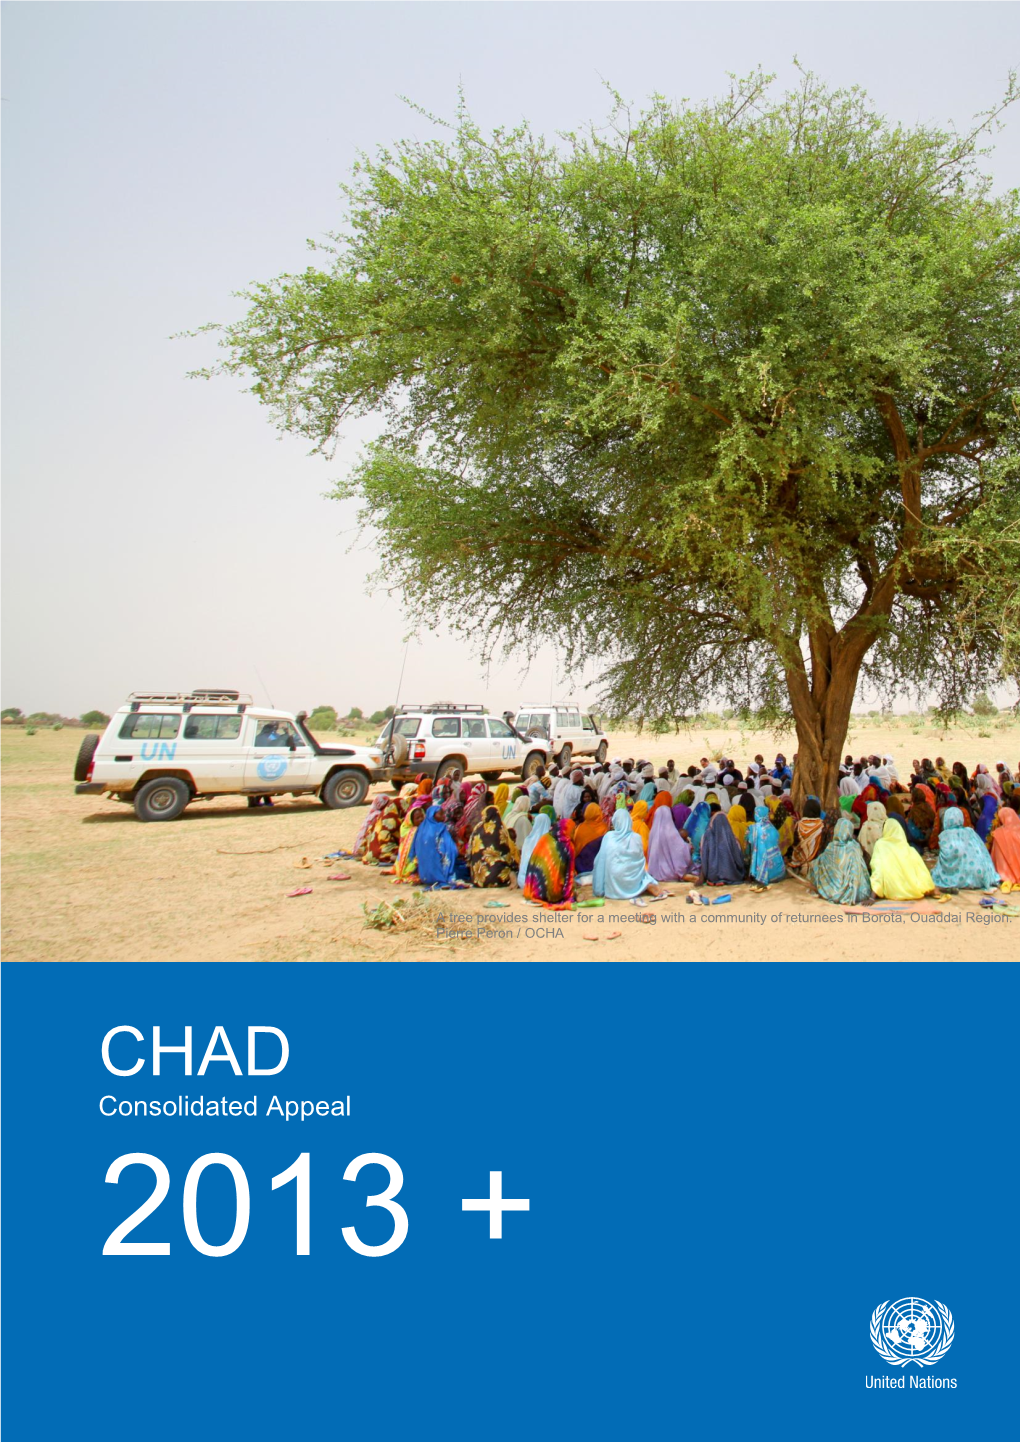 CHAD Consolidated Appeal 2013 +